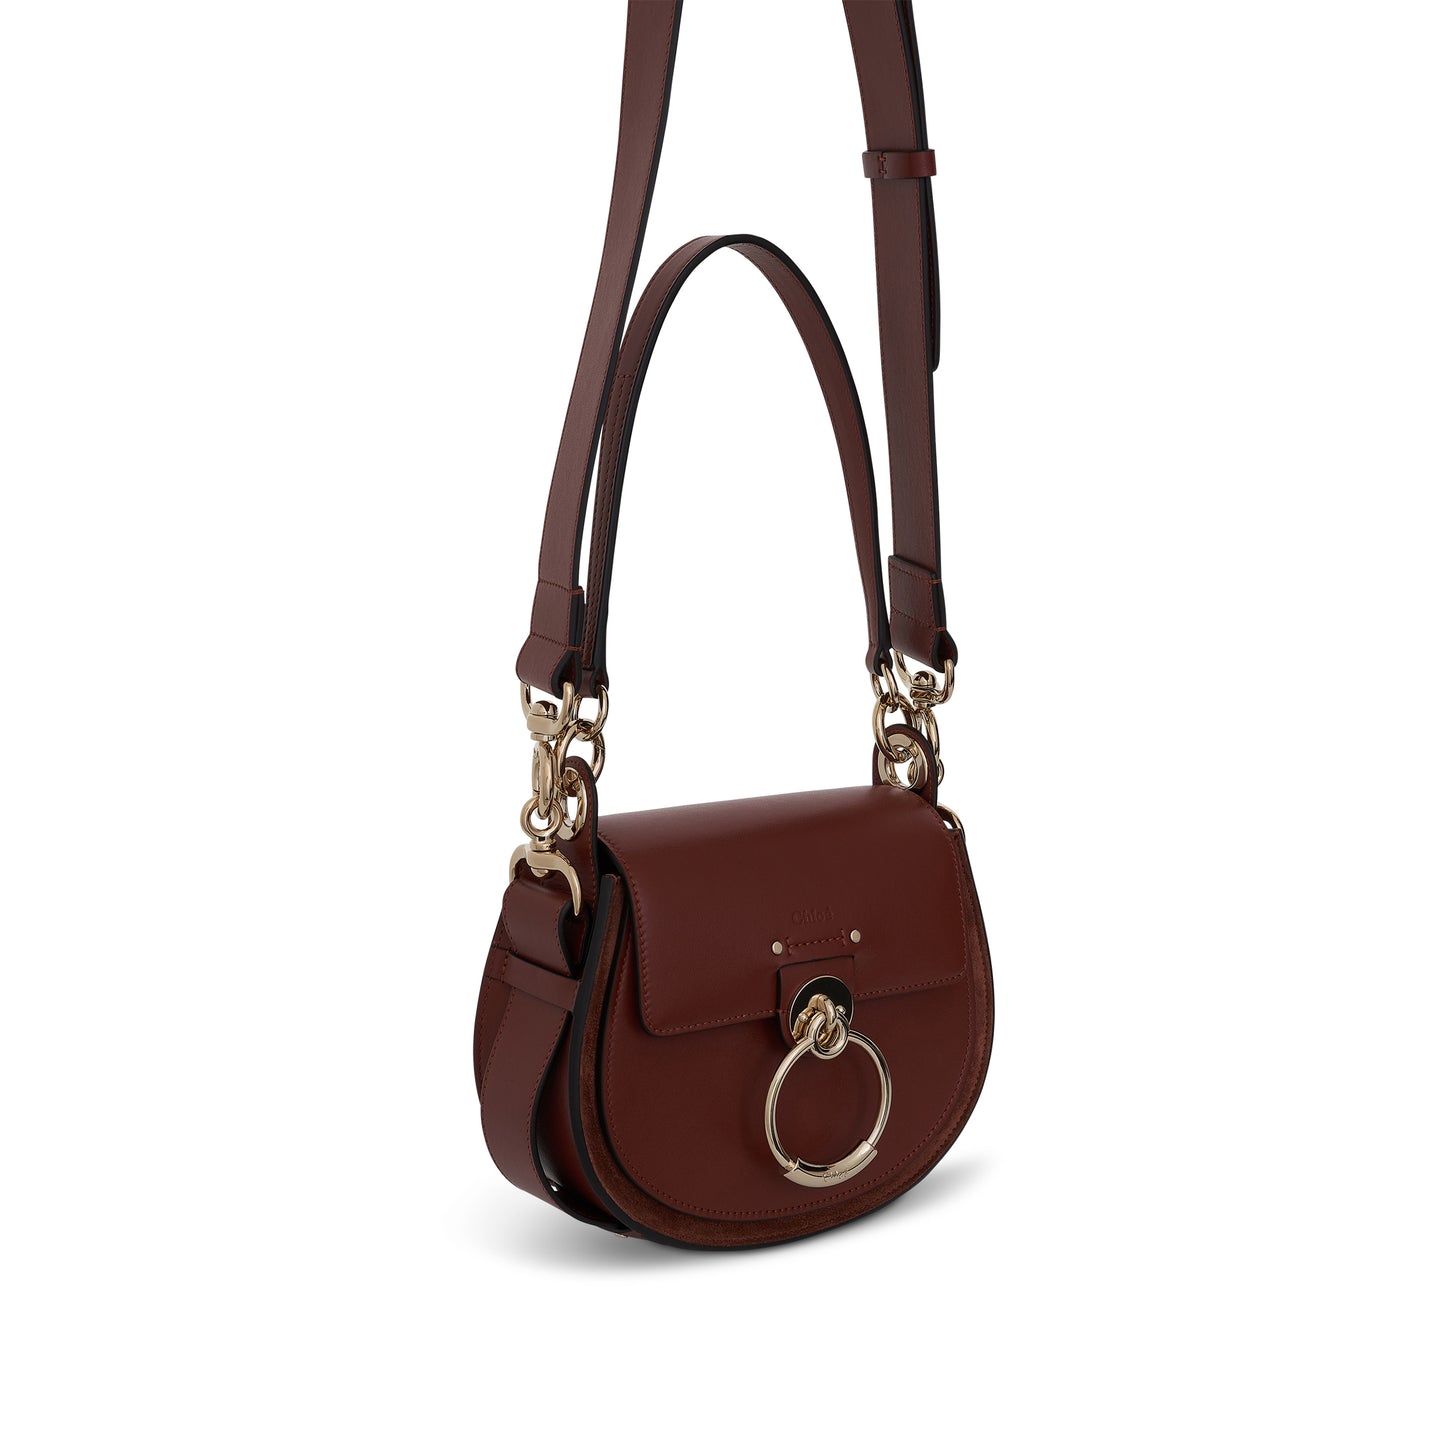 Small Tess Bag in Shiny & Suede Calfskin in Sepia Brown